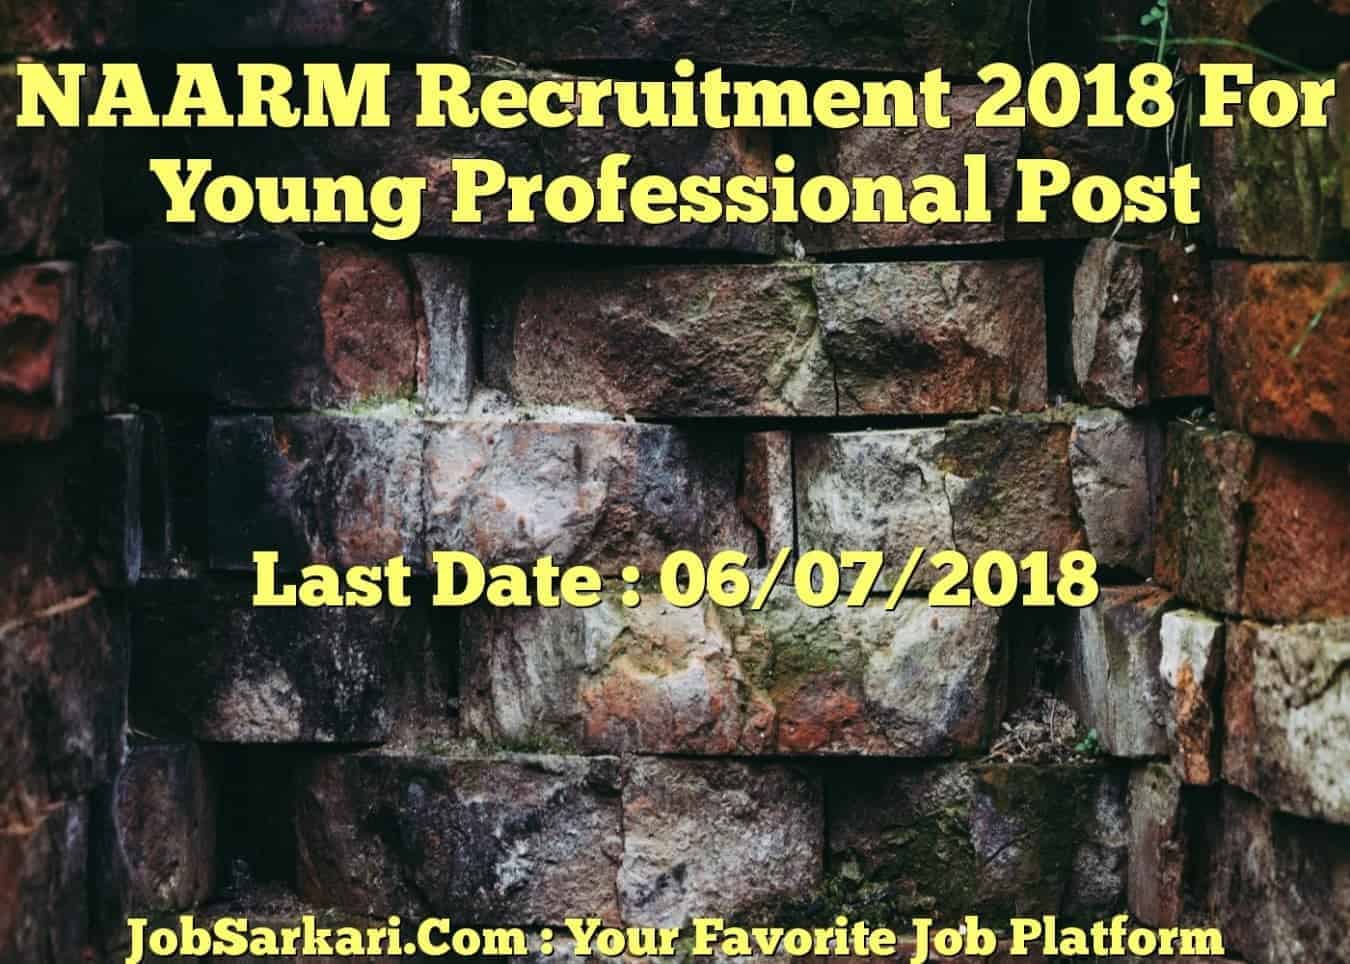 NAARM Recruitment 2018 For Young Professional Post